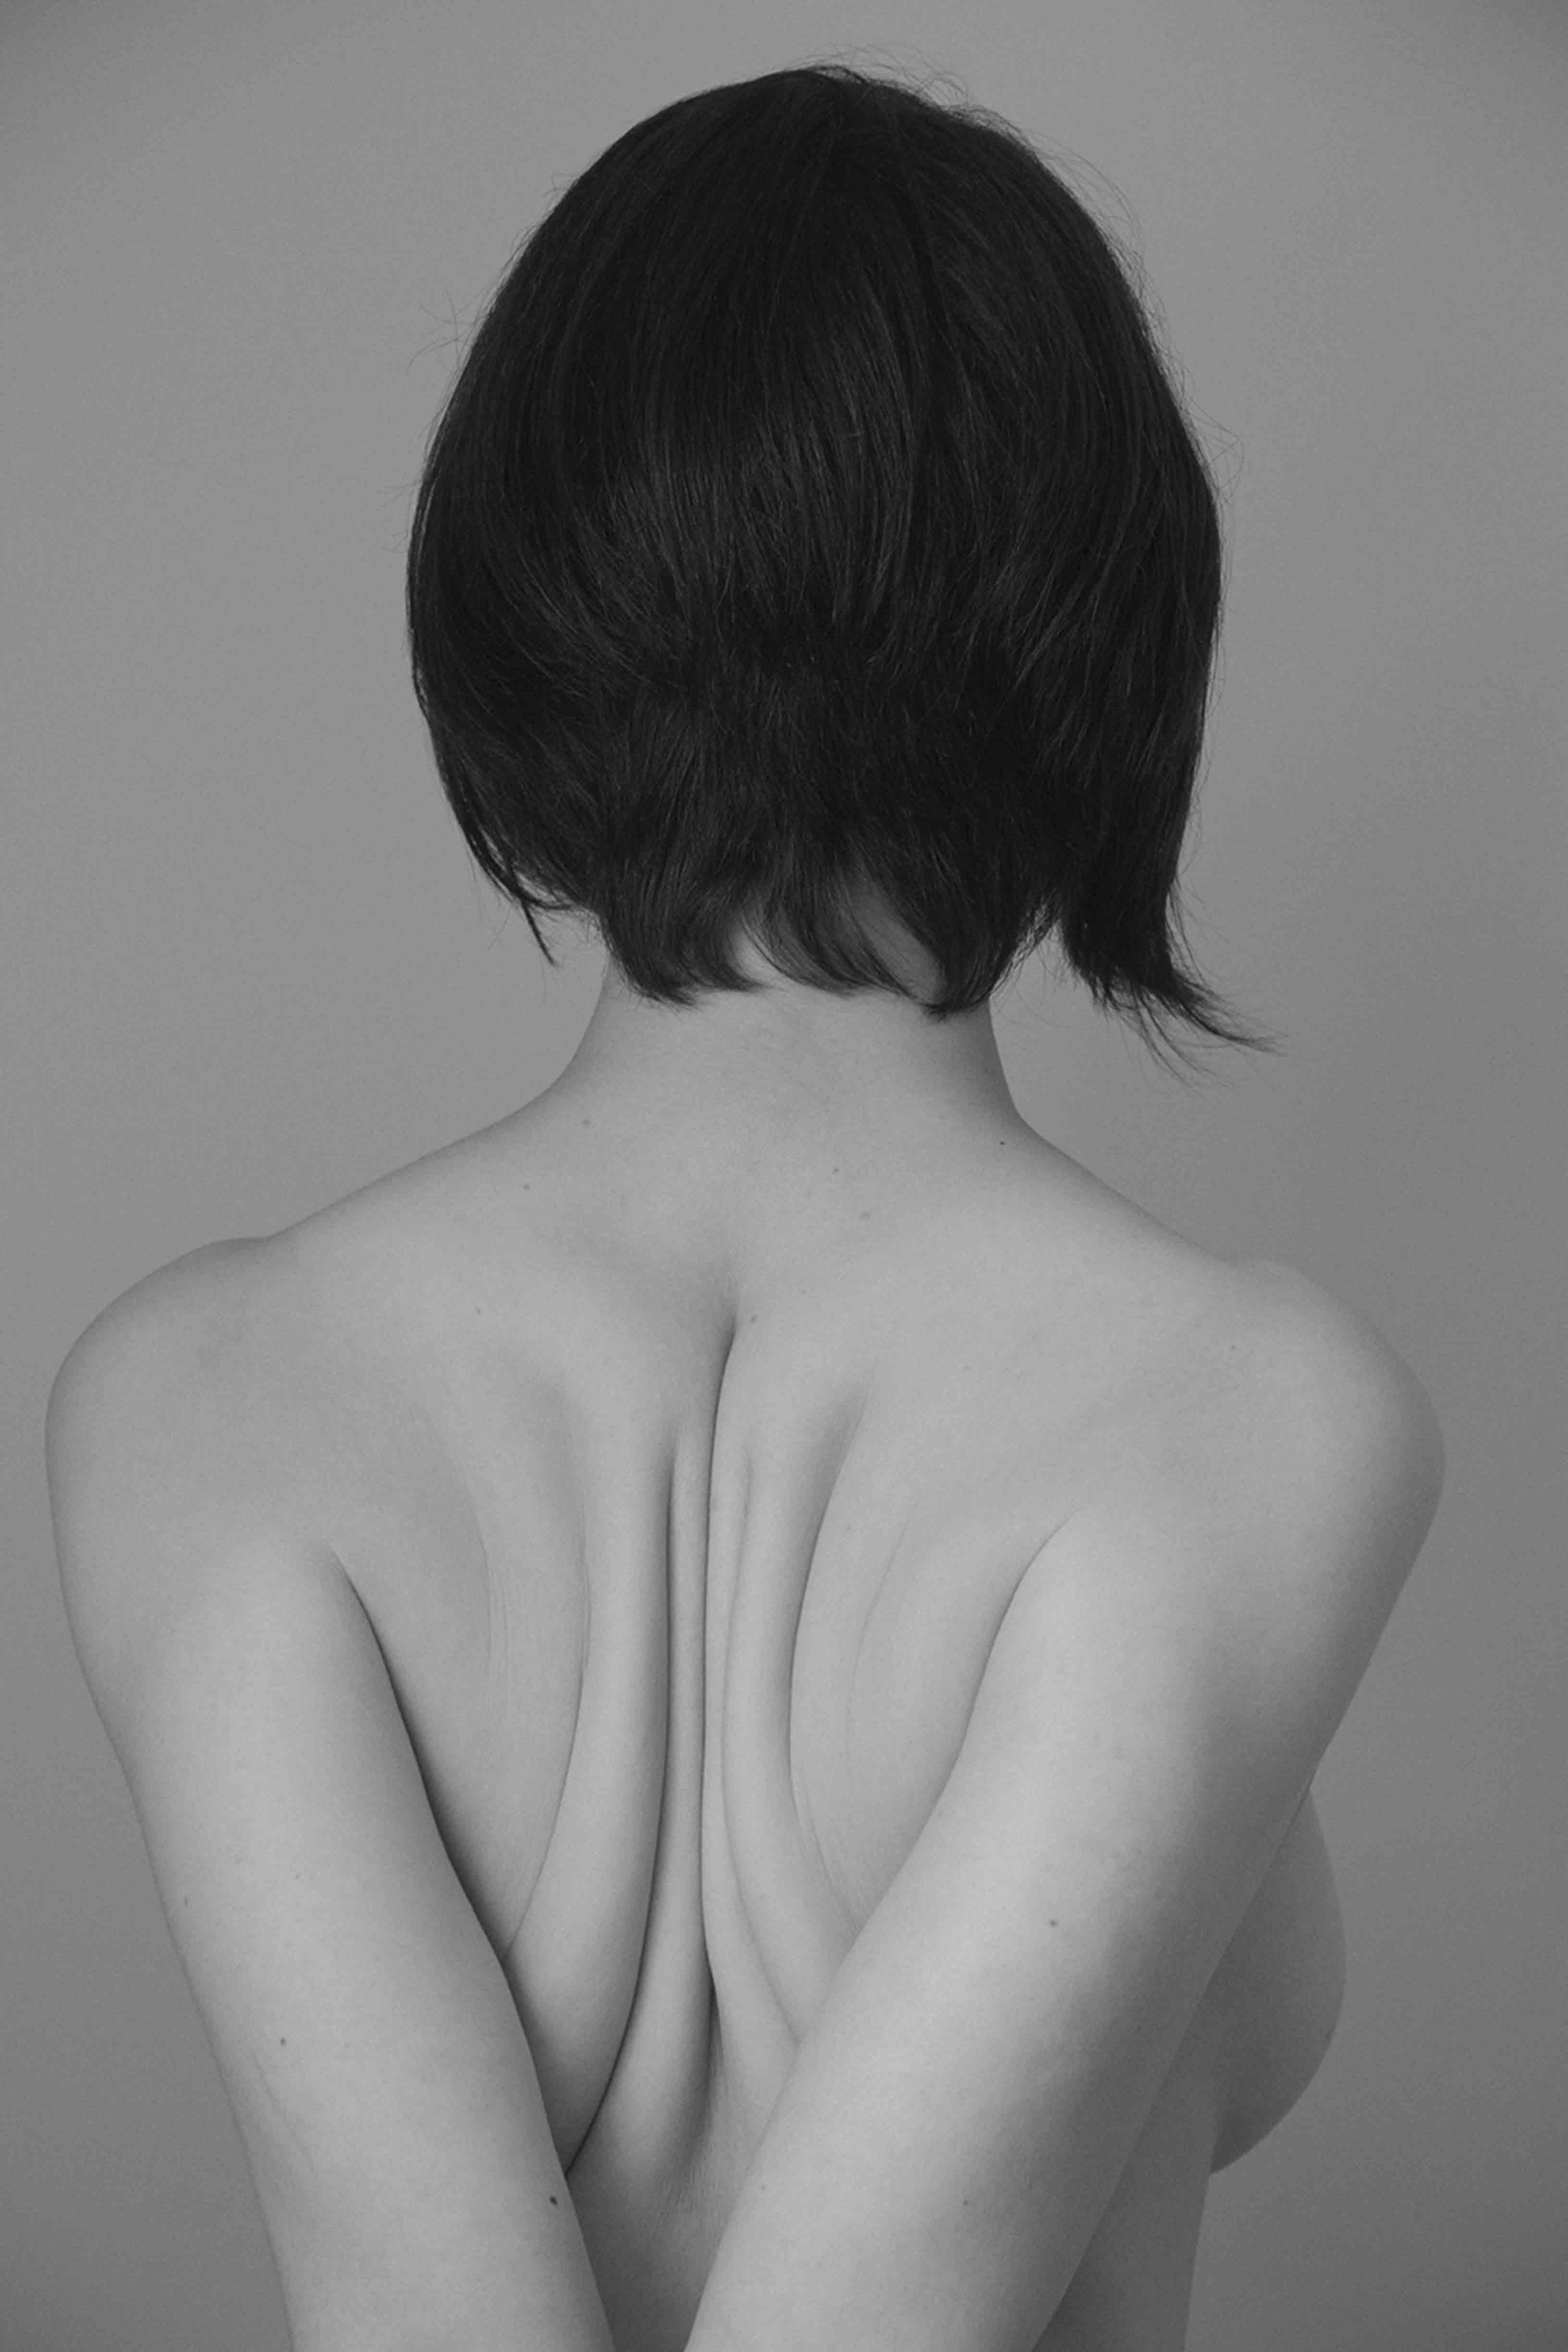 Black and white portrait of the back of a woman, with short black hair, her arms pulled backwards, pushing her shoulder blades together© Marisol Mendez